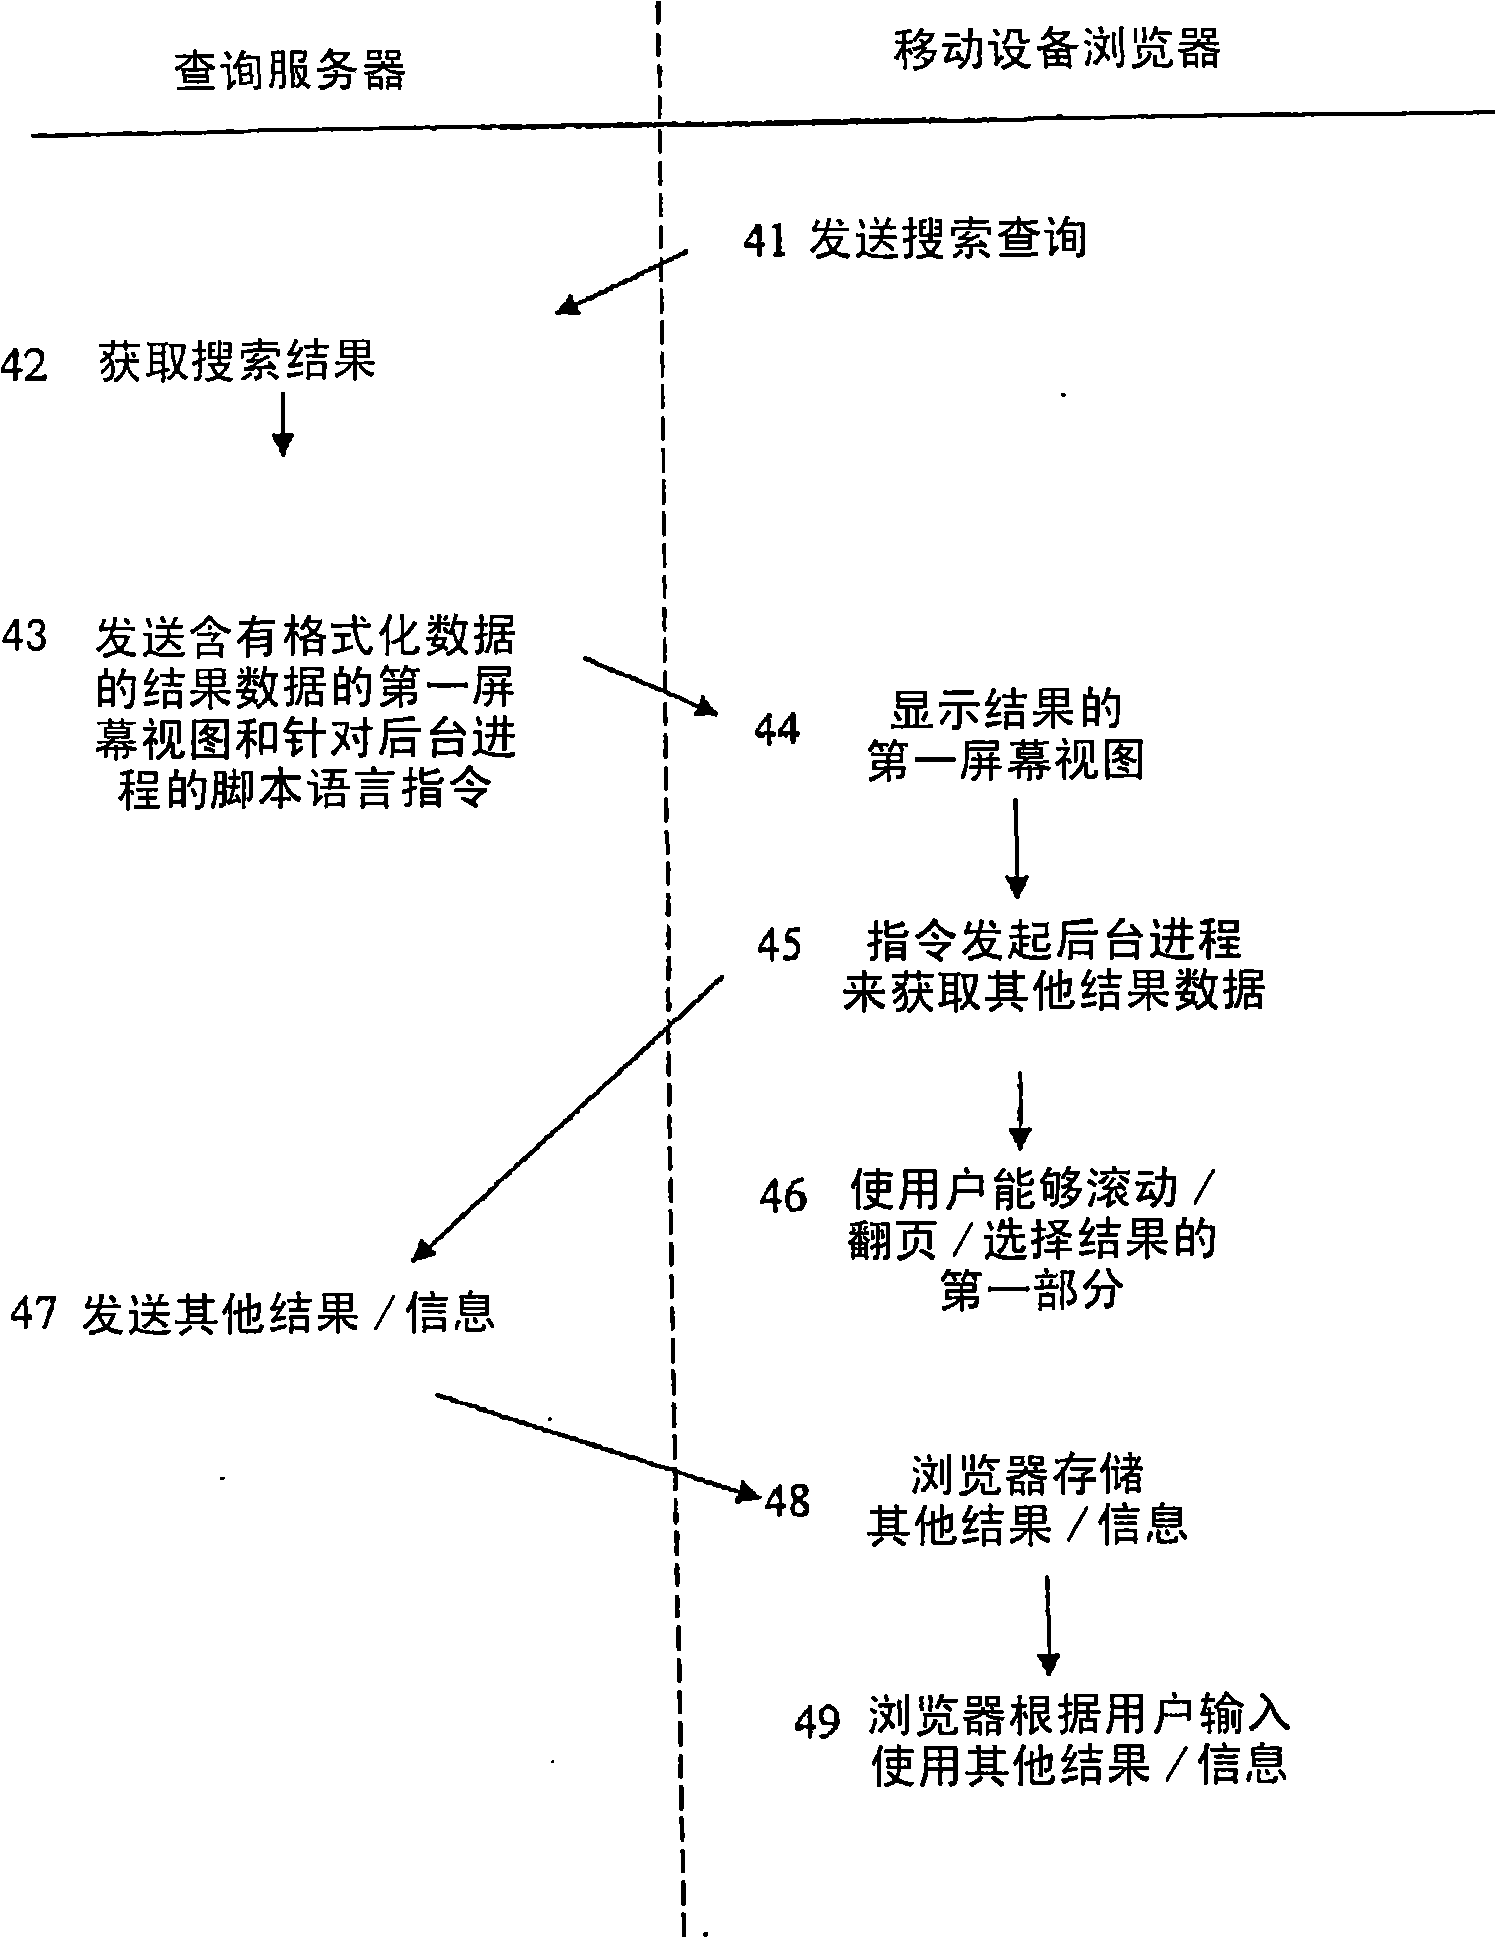 Display of search results on mobile device browser with background processing